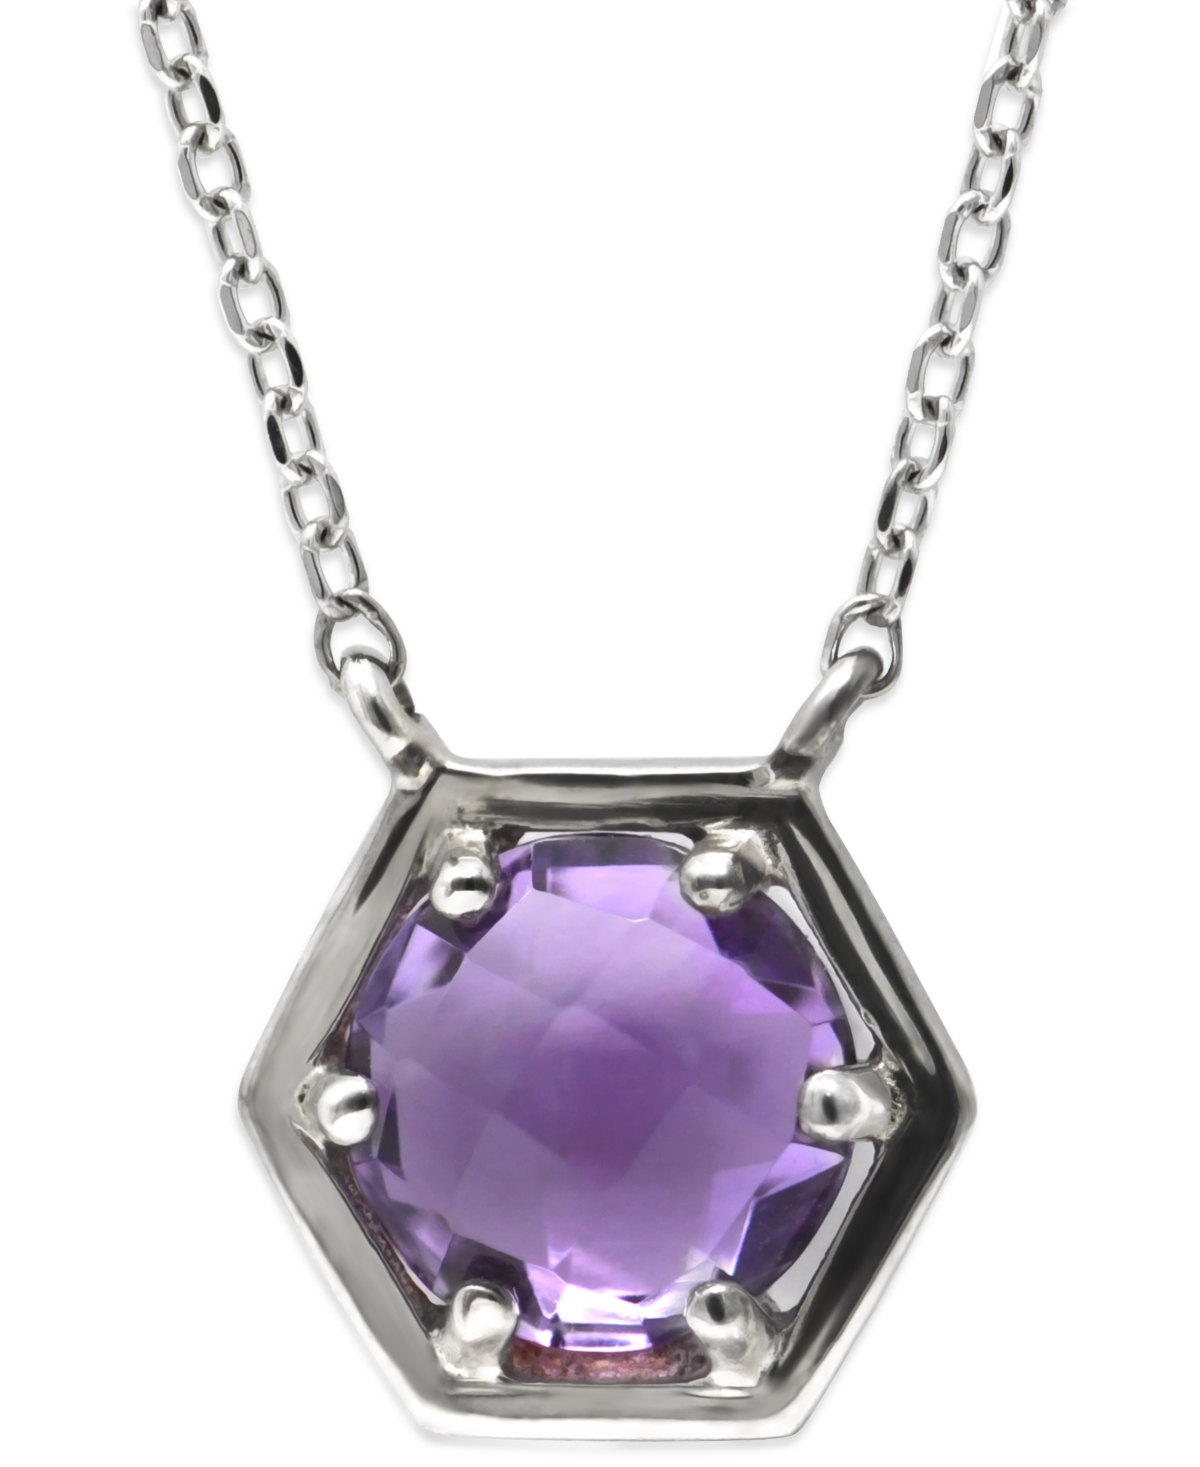 Jac & Jo by Anzie Amethyst Solitaire Pendant Necklace (1-1/3 ct. t.w.) in Sterling Silver, 16" + 1" extender - Silver